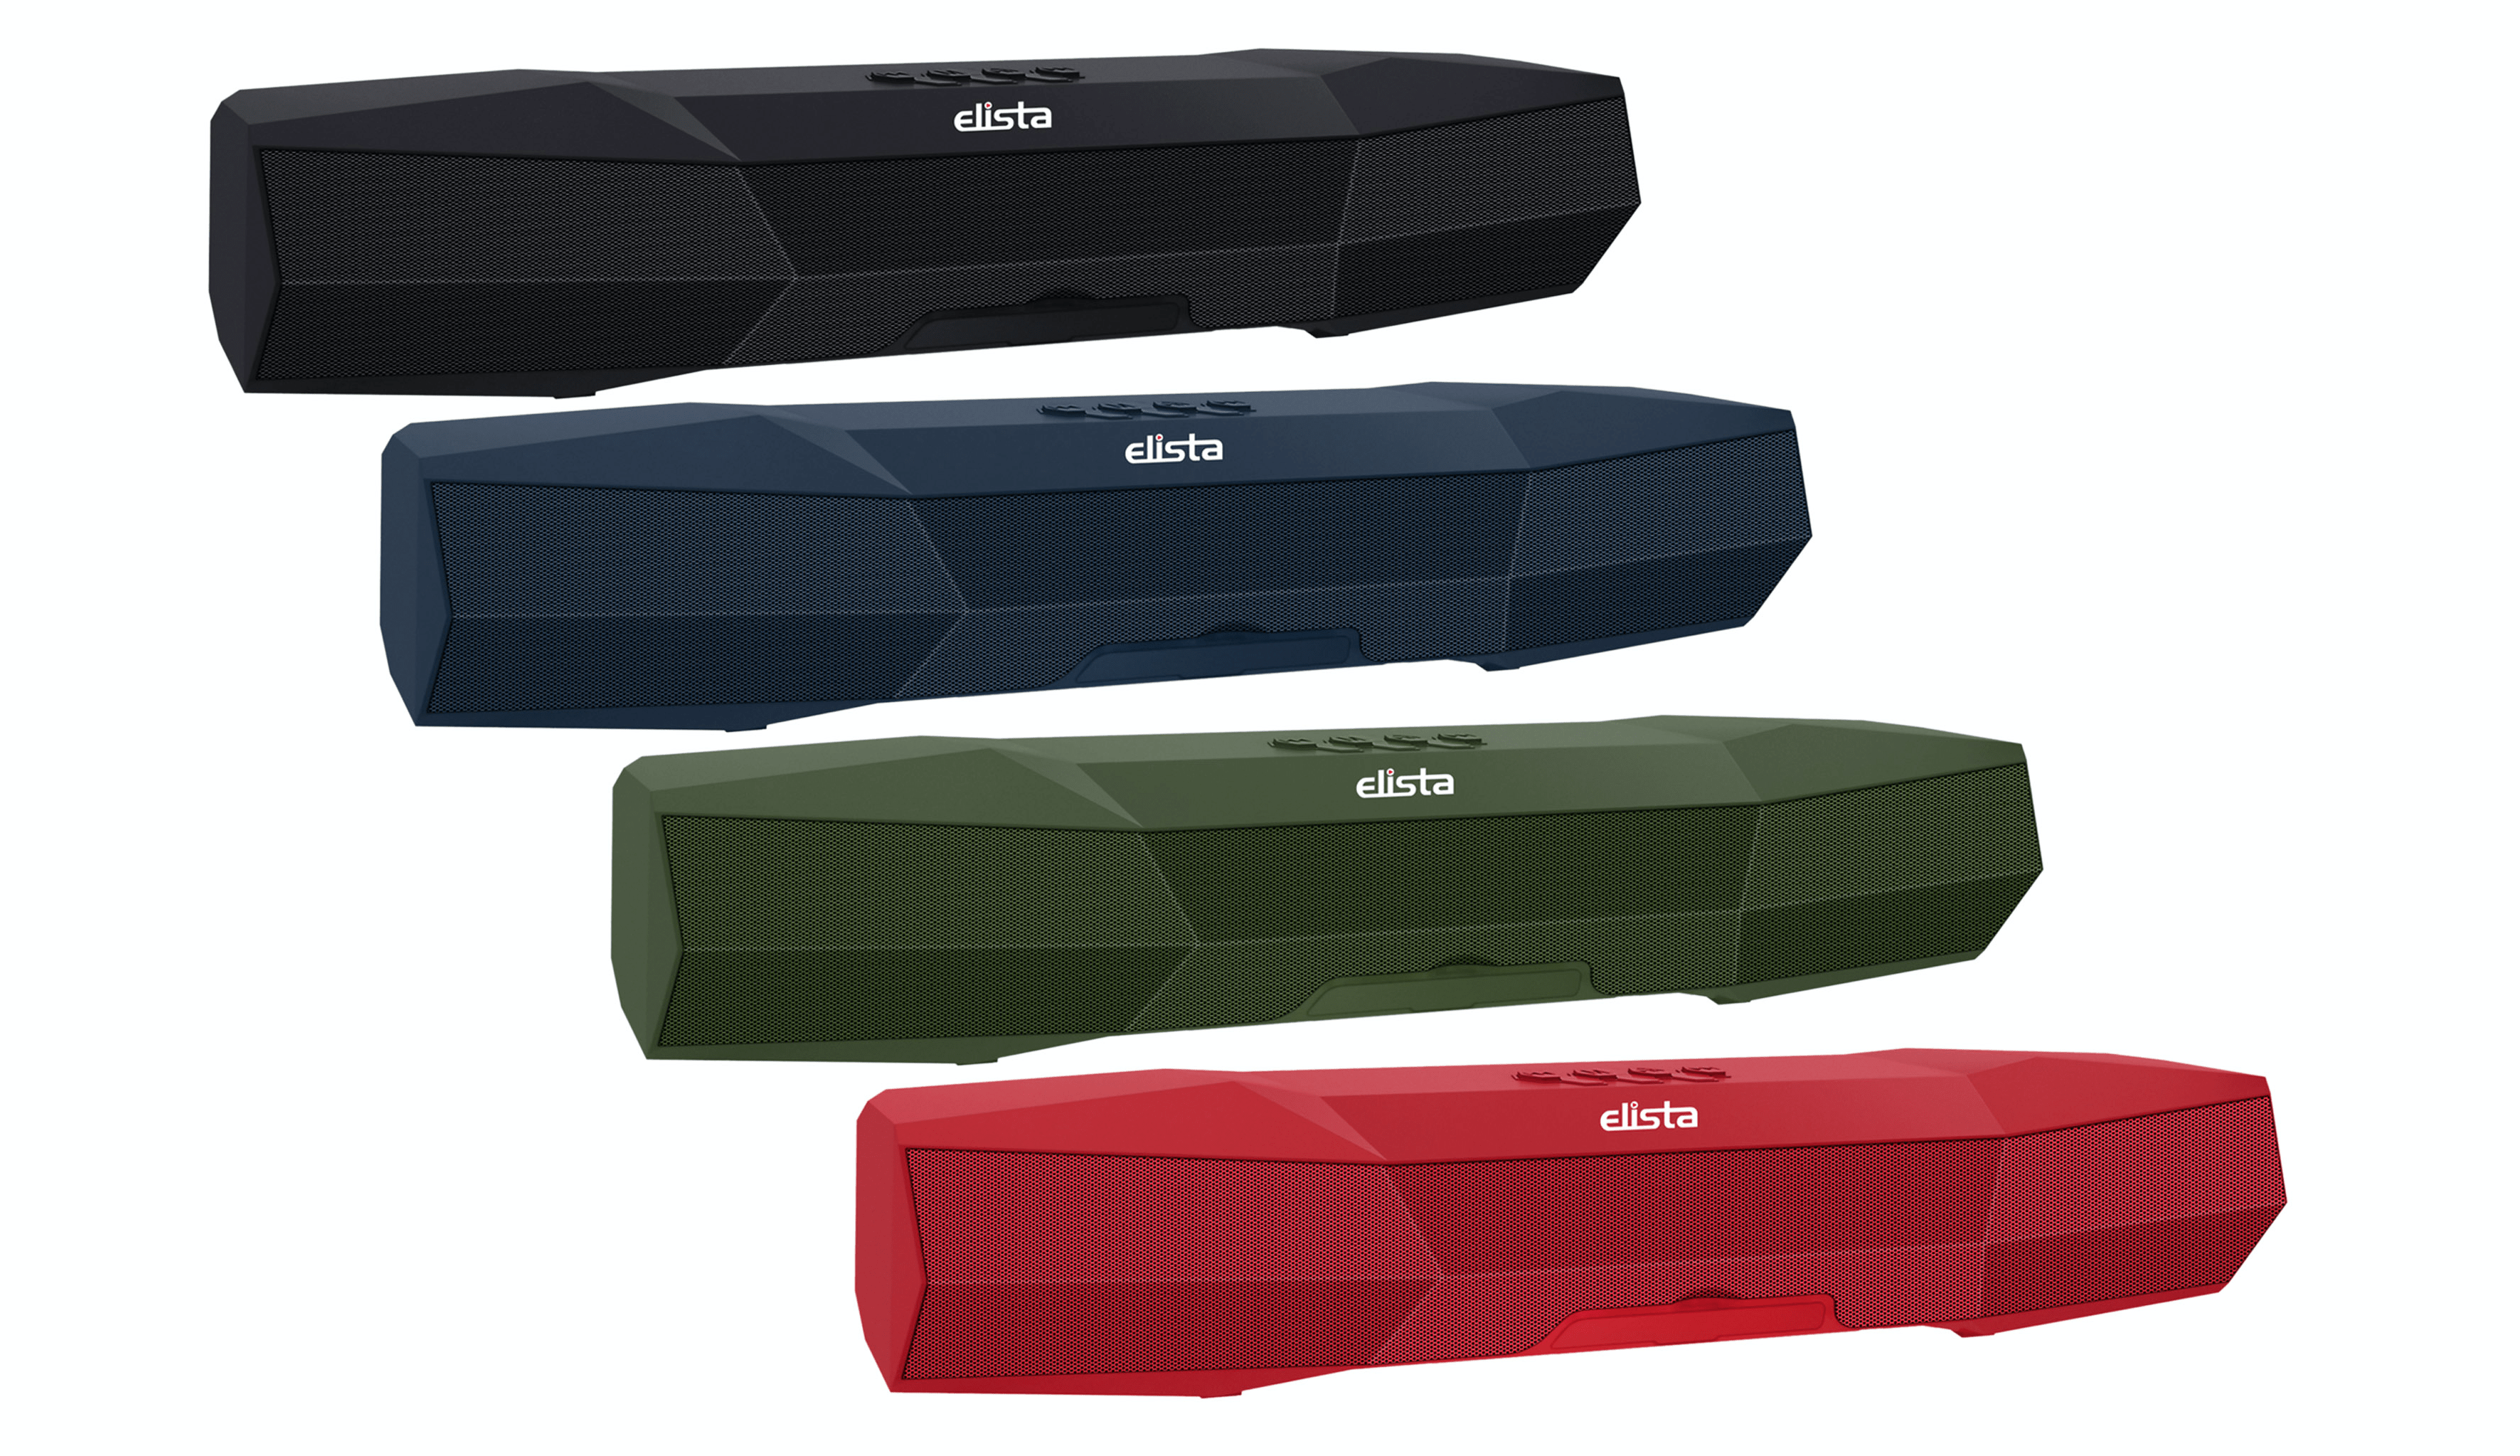 Elista Launched a new line of Portable Speakers